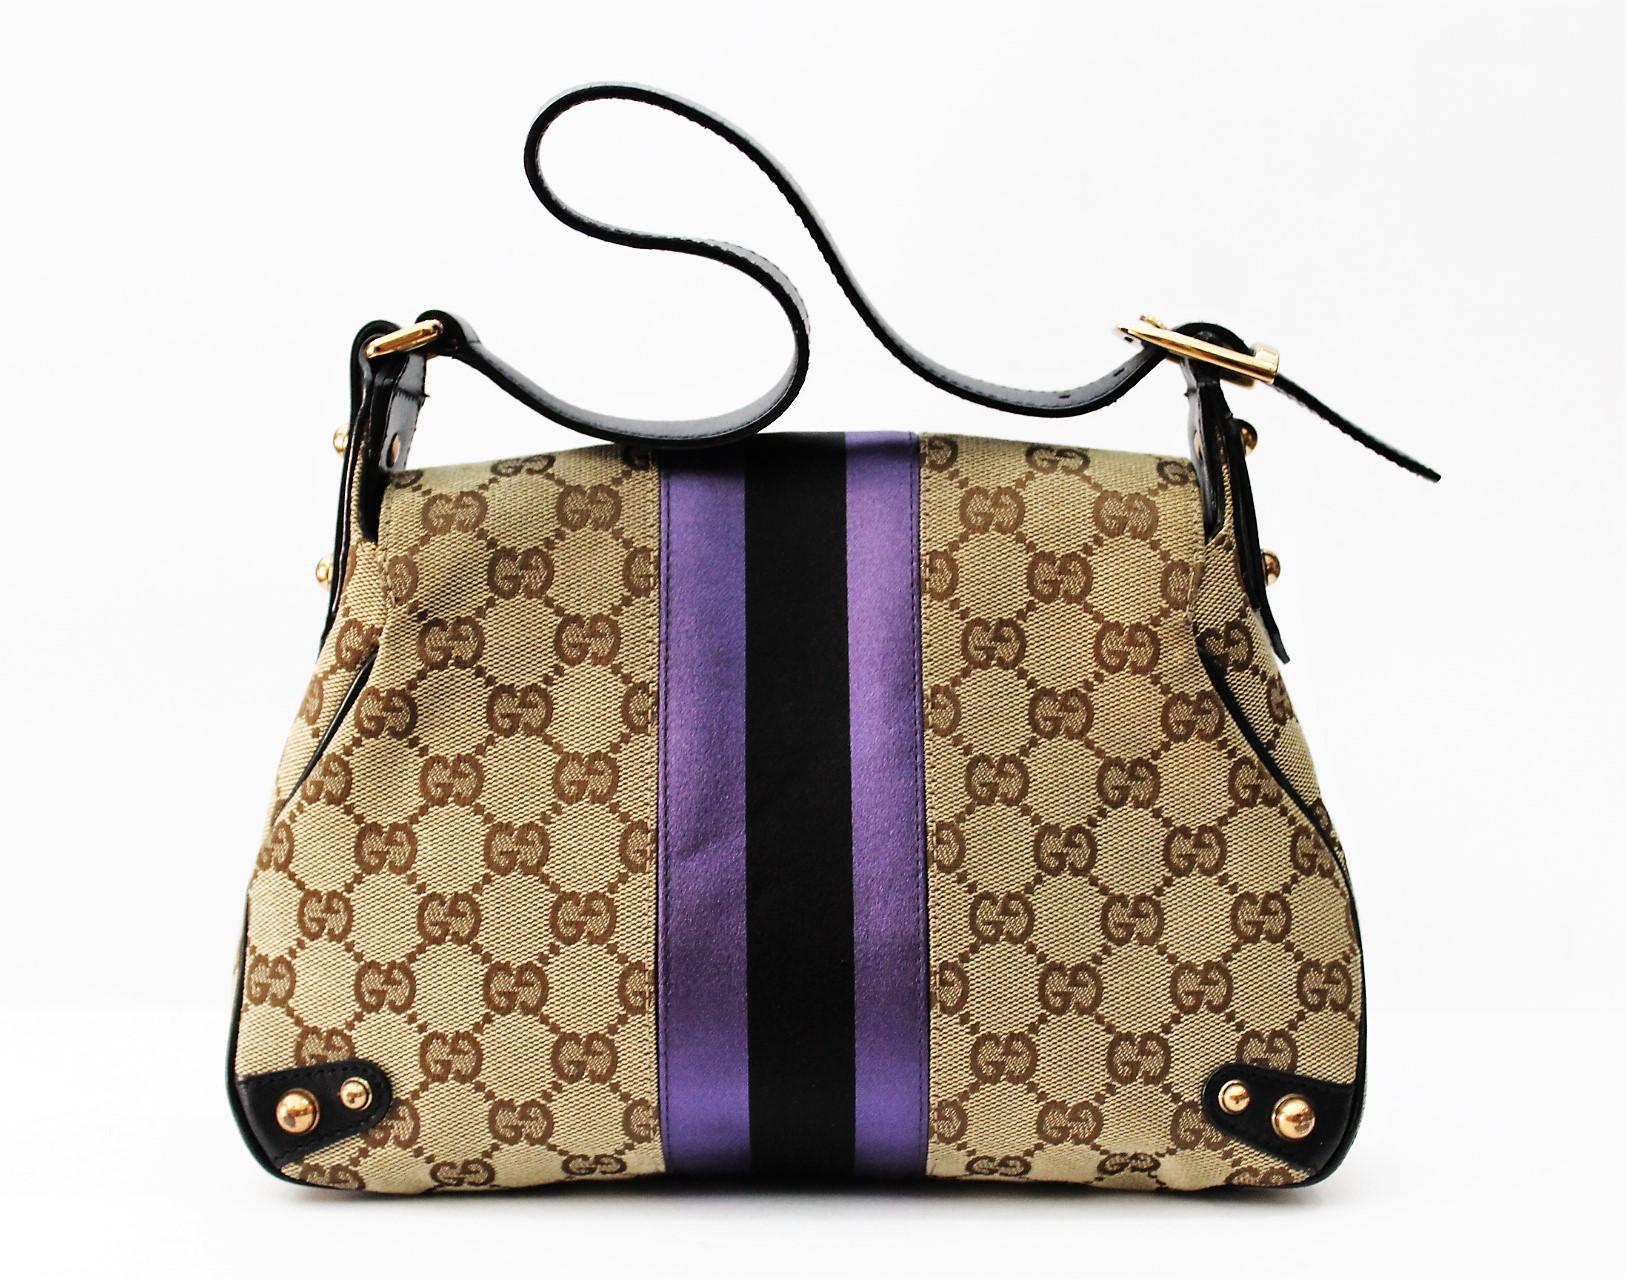 Gucci shoulder bag limited edition , a beautiful collection by Tom Ford.